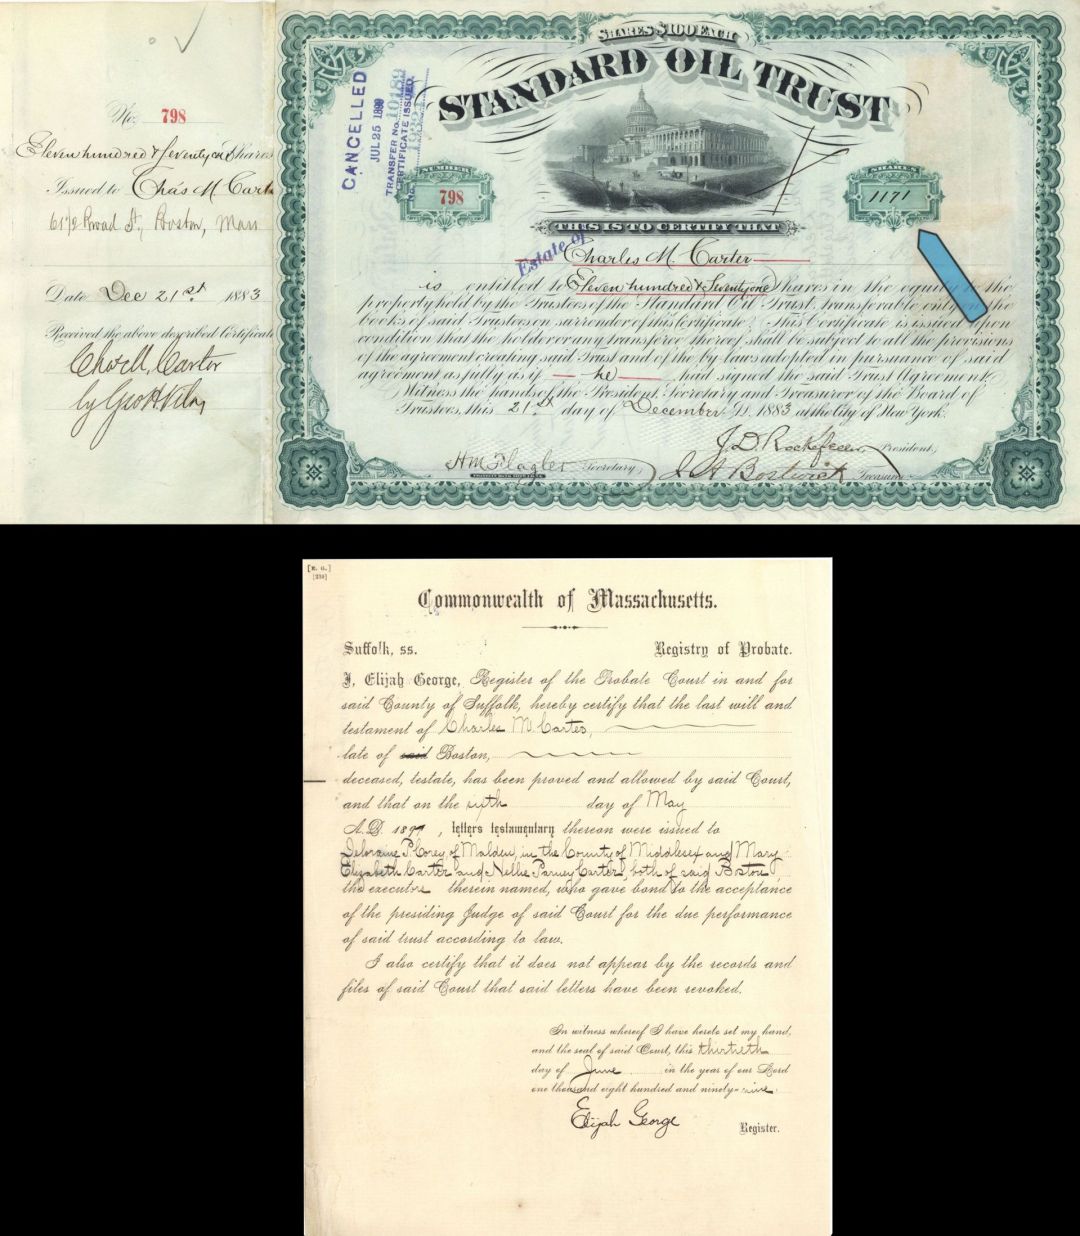 Standard Oil Trust Signed by  J.D. Rockefeller,  H.M. Flagler and J.A. Bostwick - 1883 dated Autographed Stock Certificate